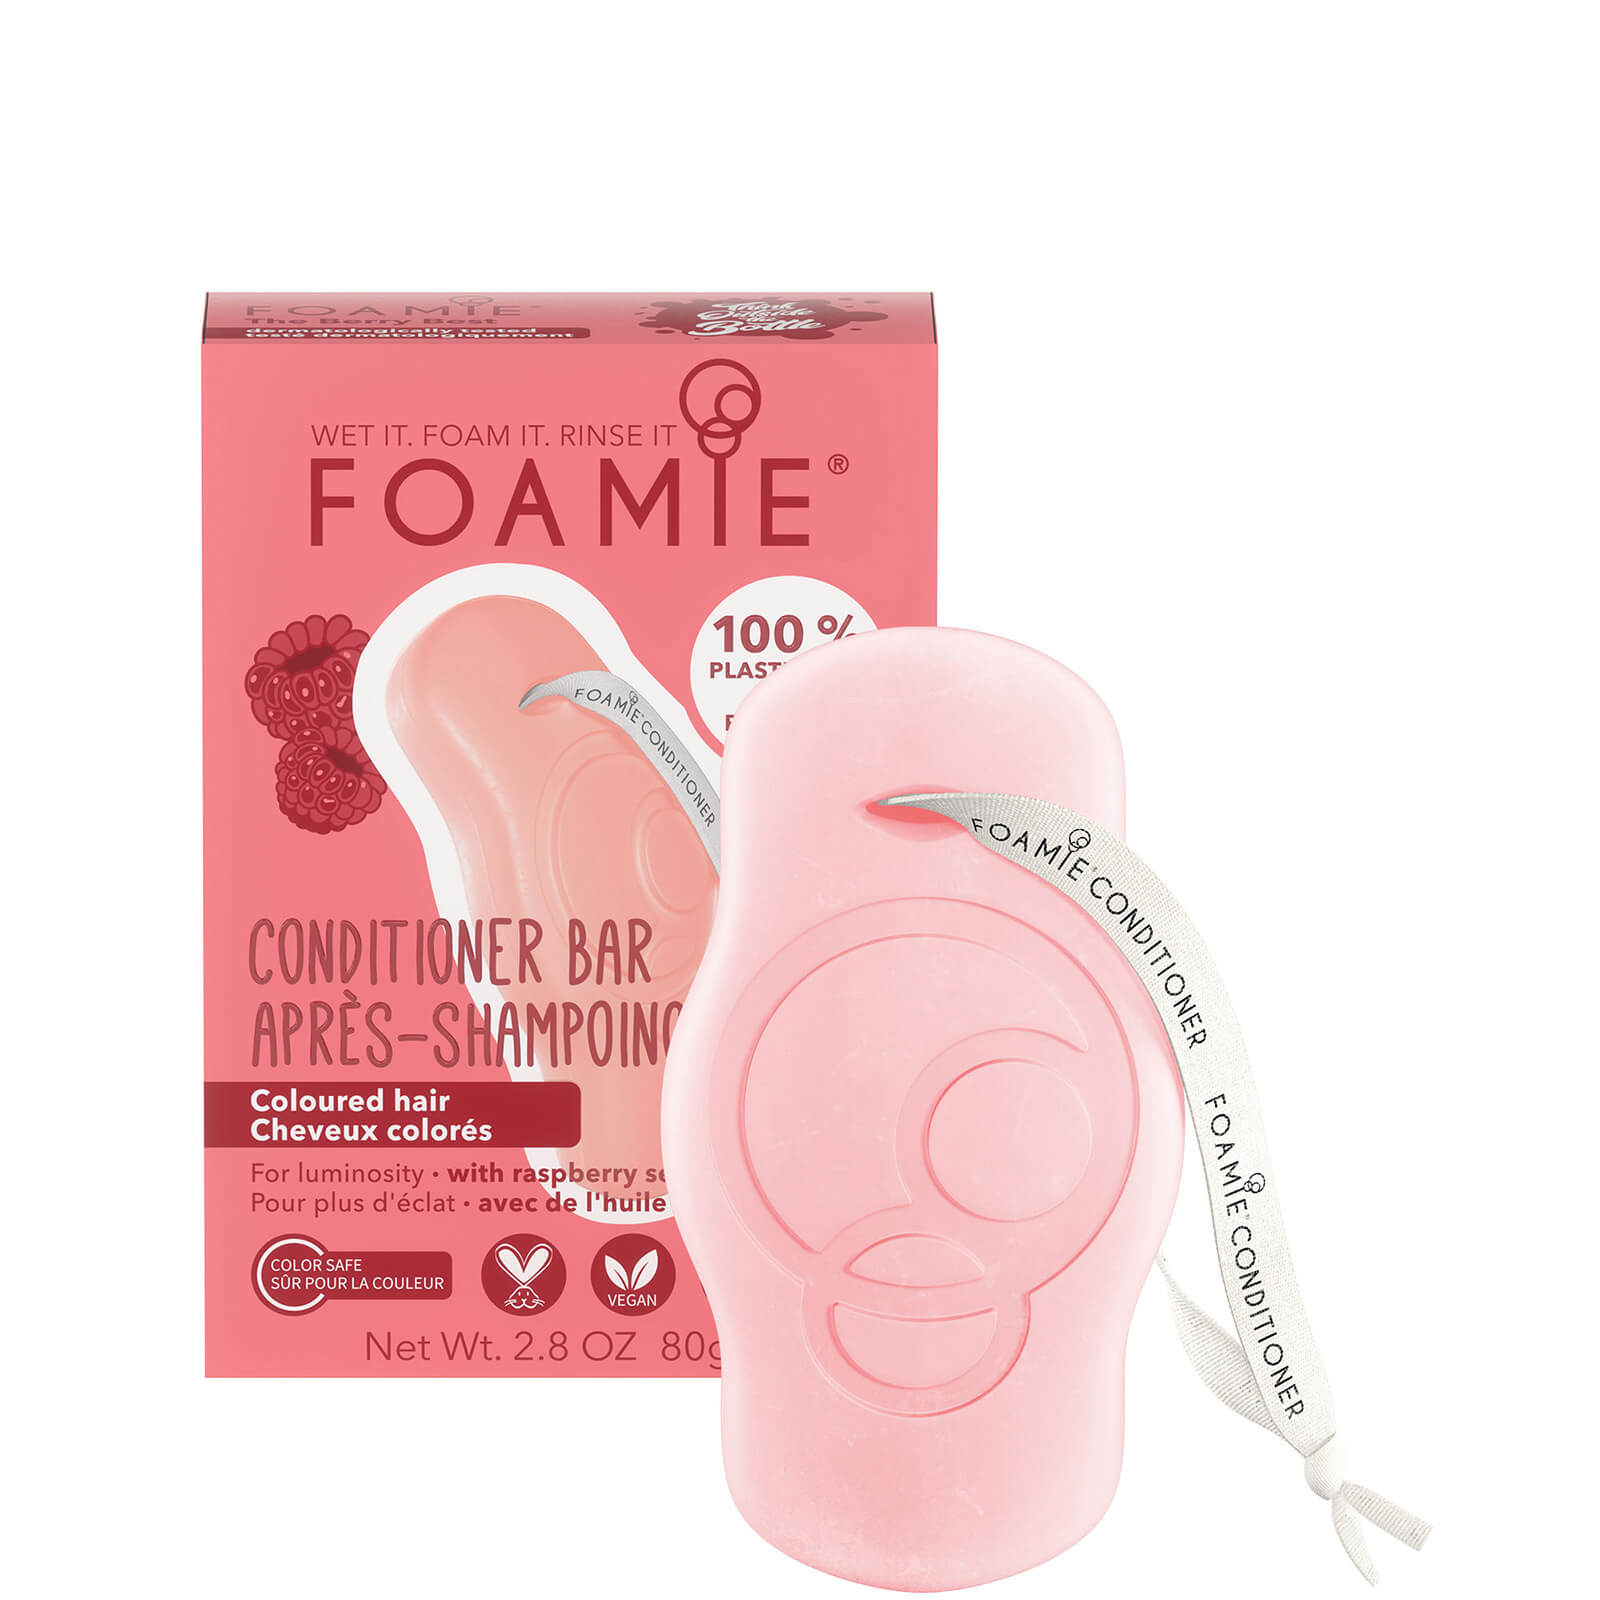 FOAMIE Conditioner Bar - Raspberry for Coloured Hair